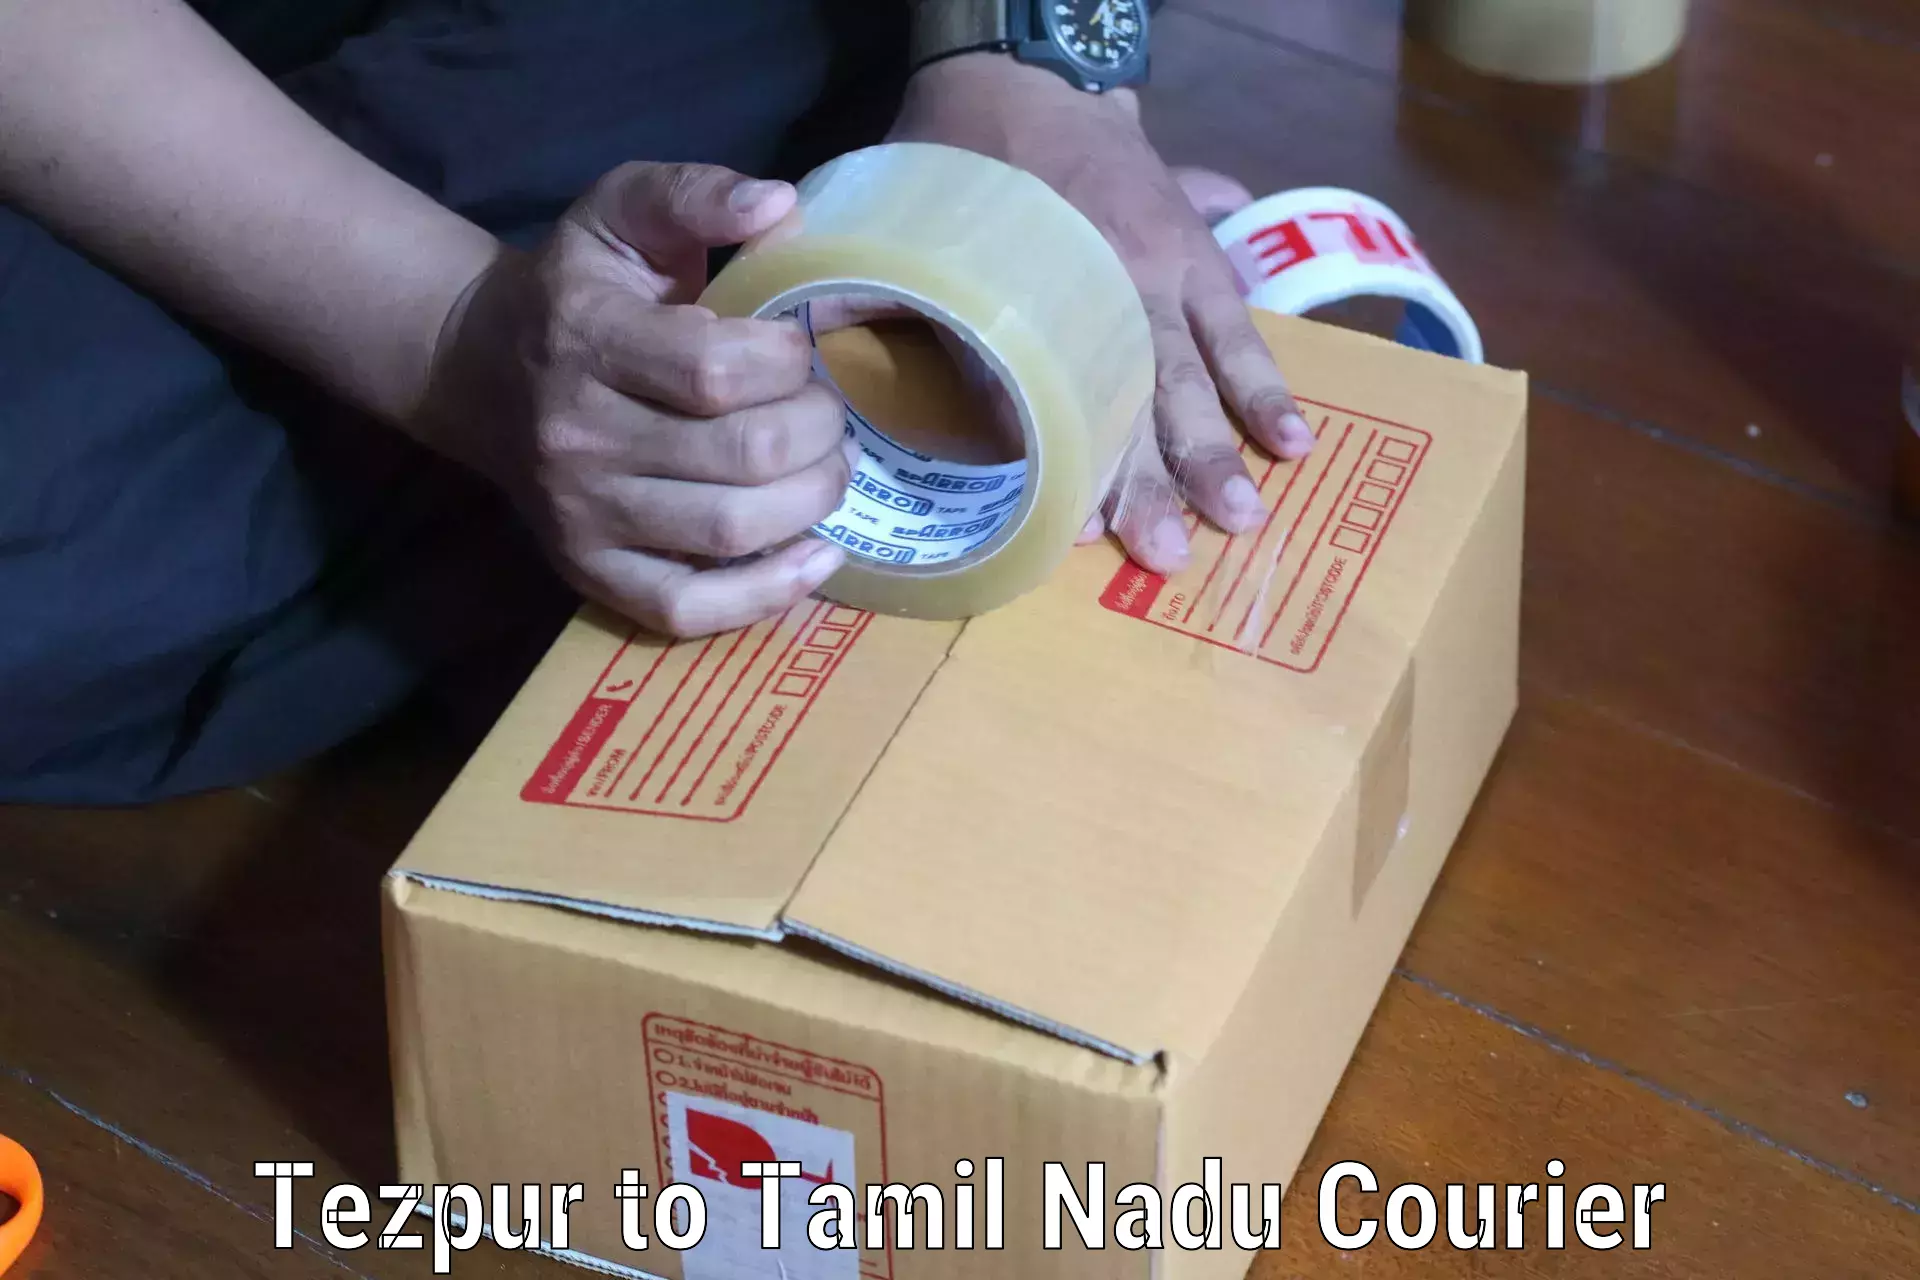 Speedy delivery service Tezpur to Ennore Port Chennai